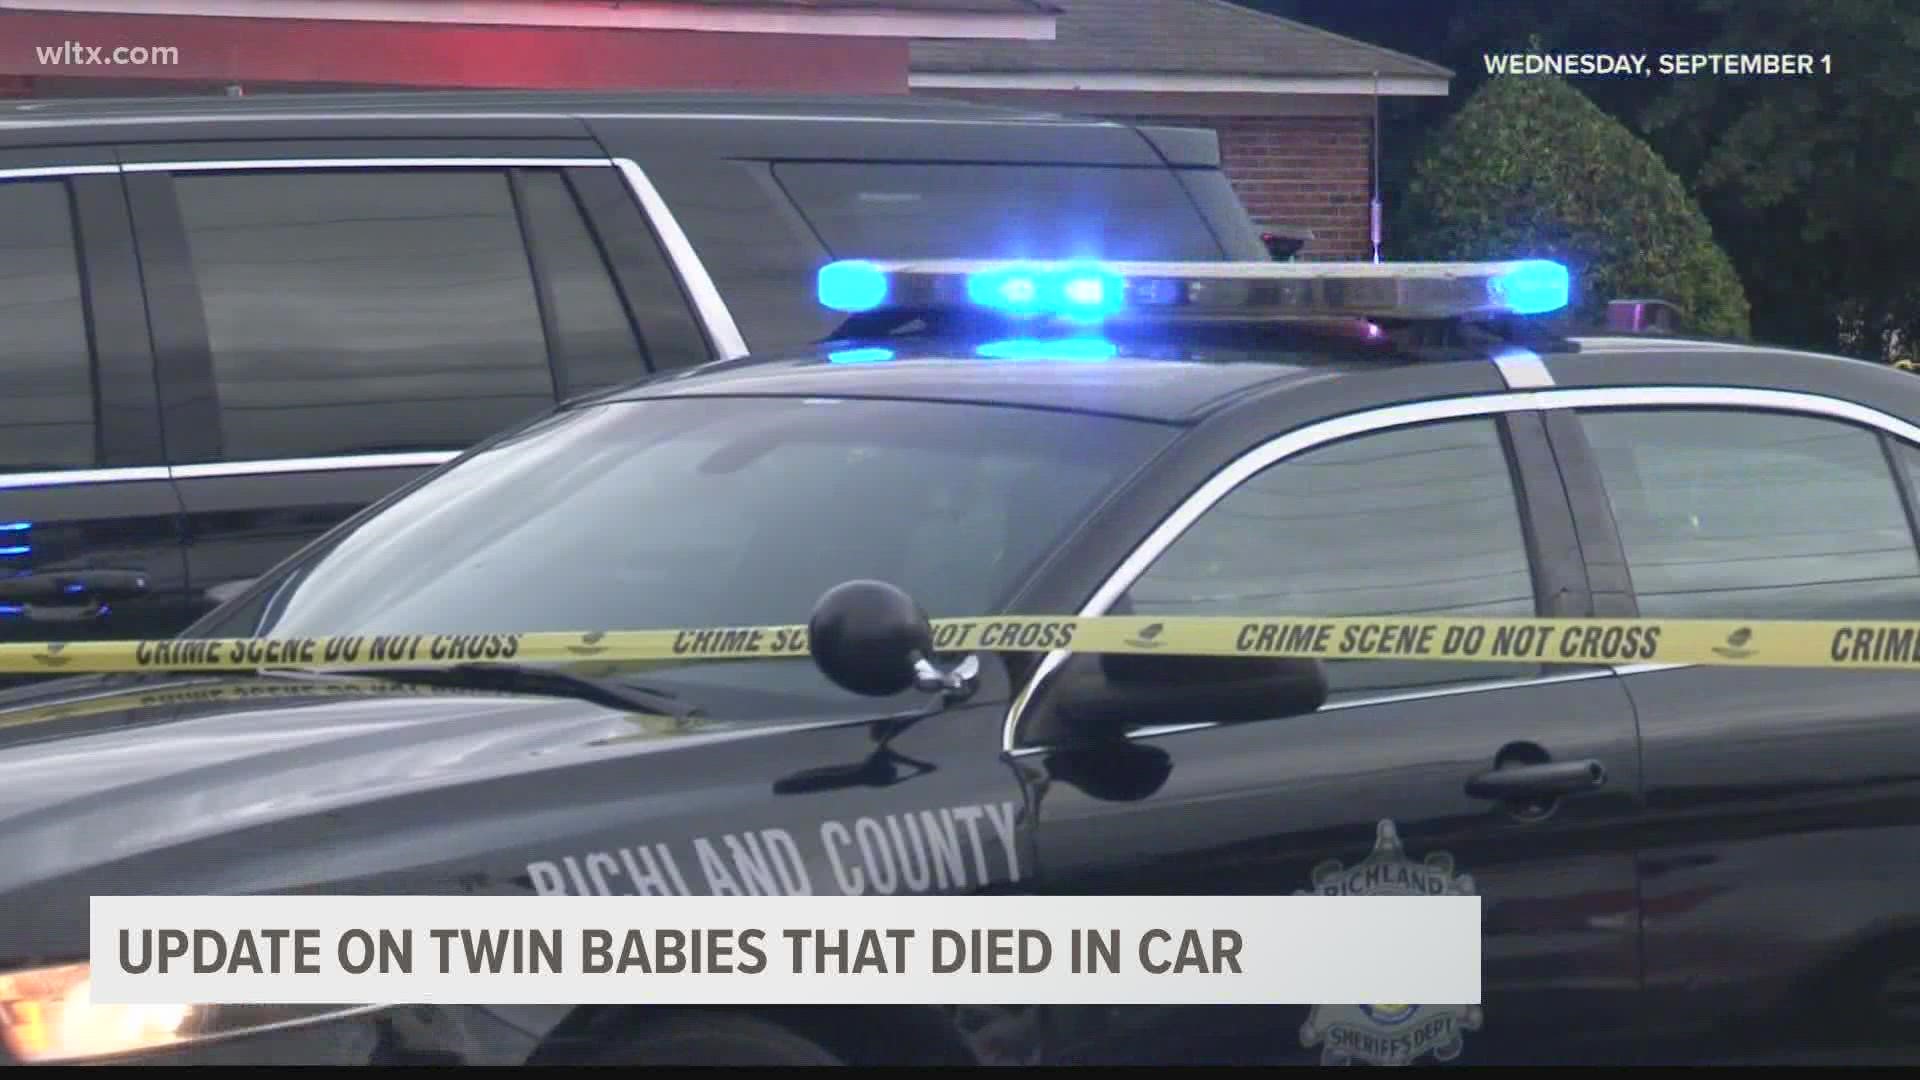 Sheriff Leon Lott held a news conference Tuesday morning where he updated the investigation into the deaths of 21-month-old twins Bryson and Brayden McDaniel.